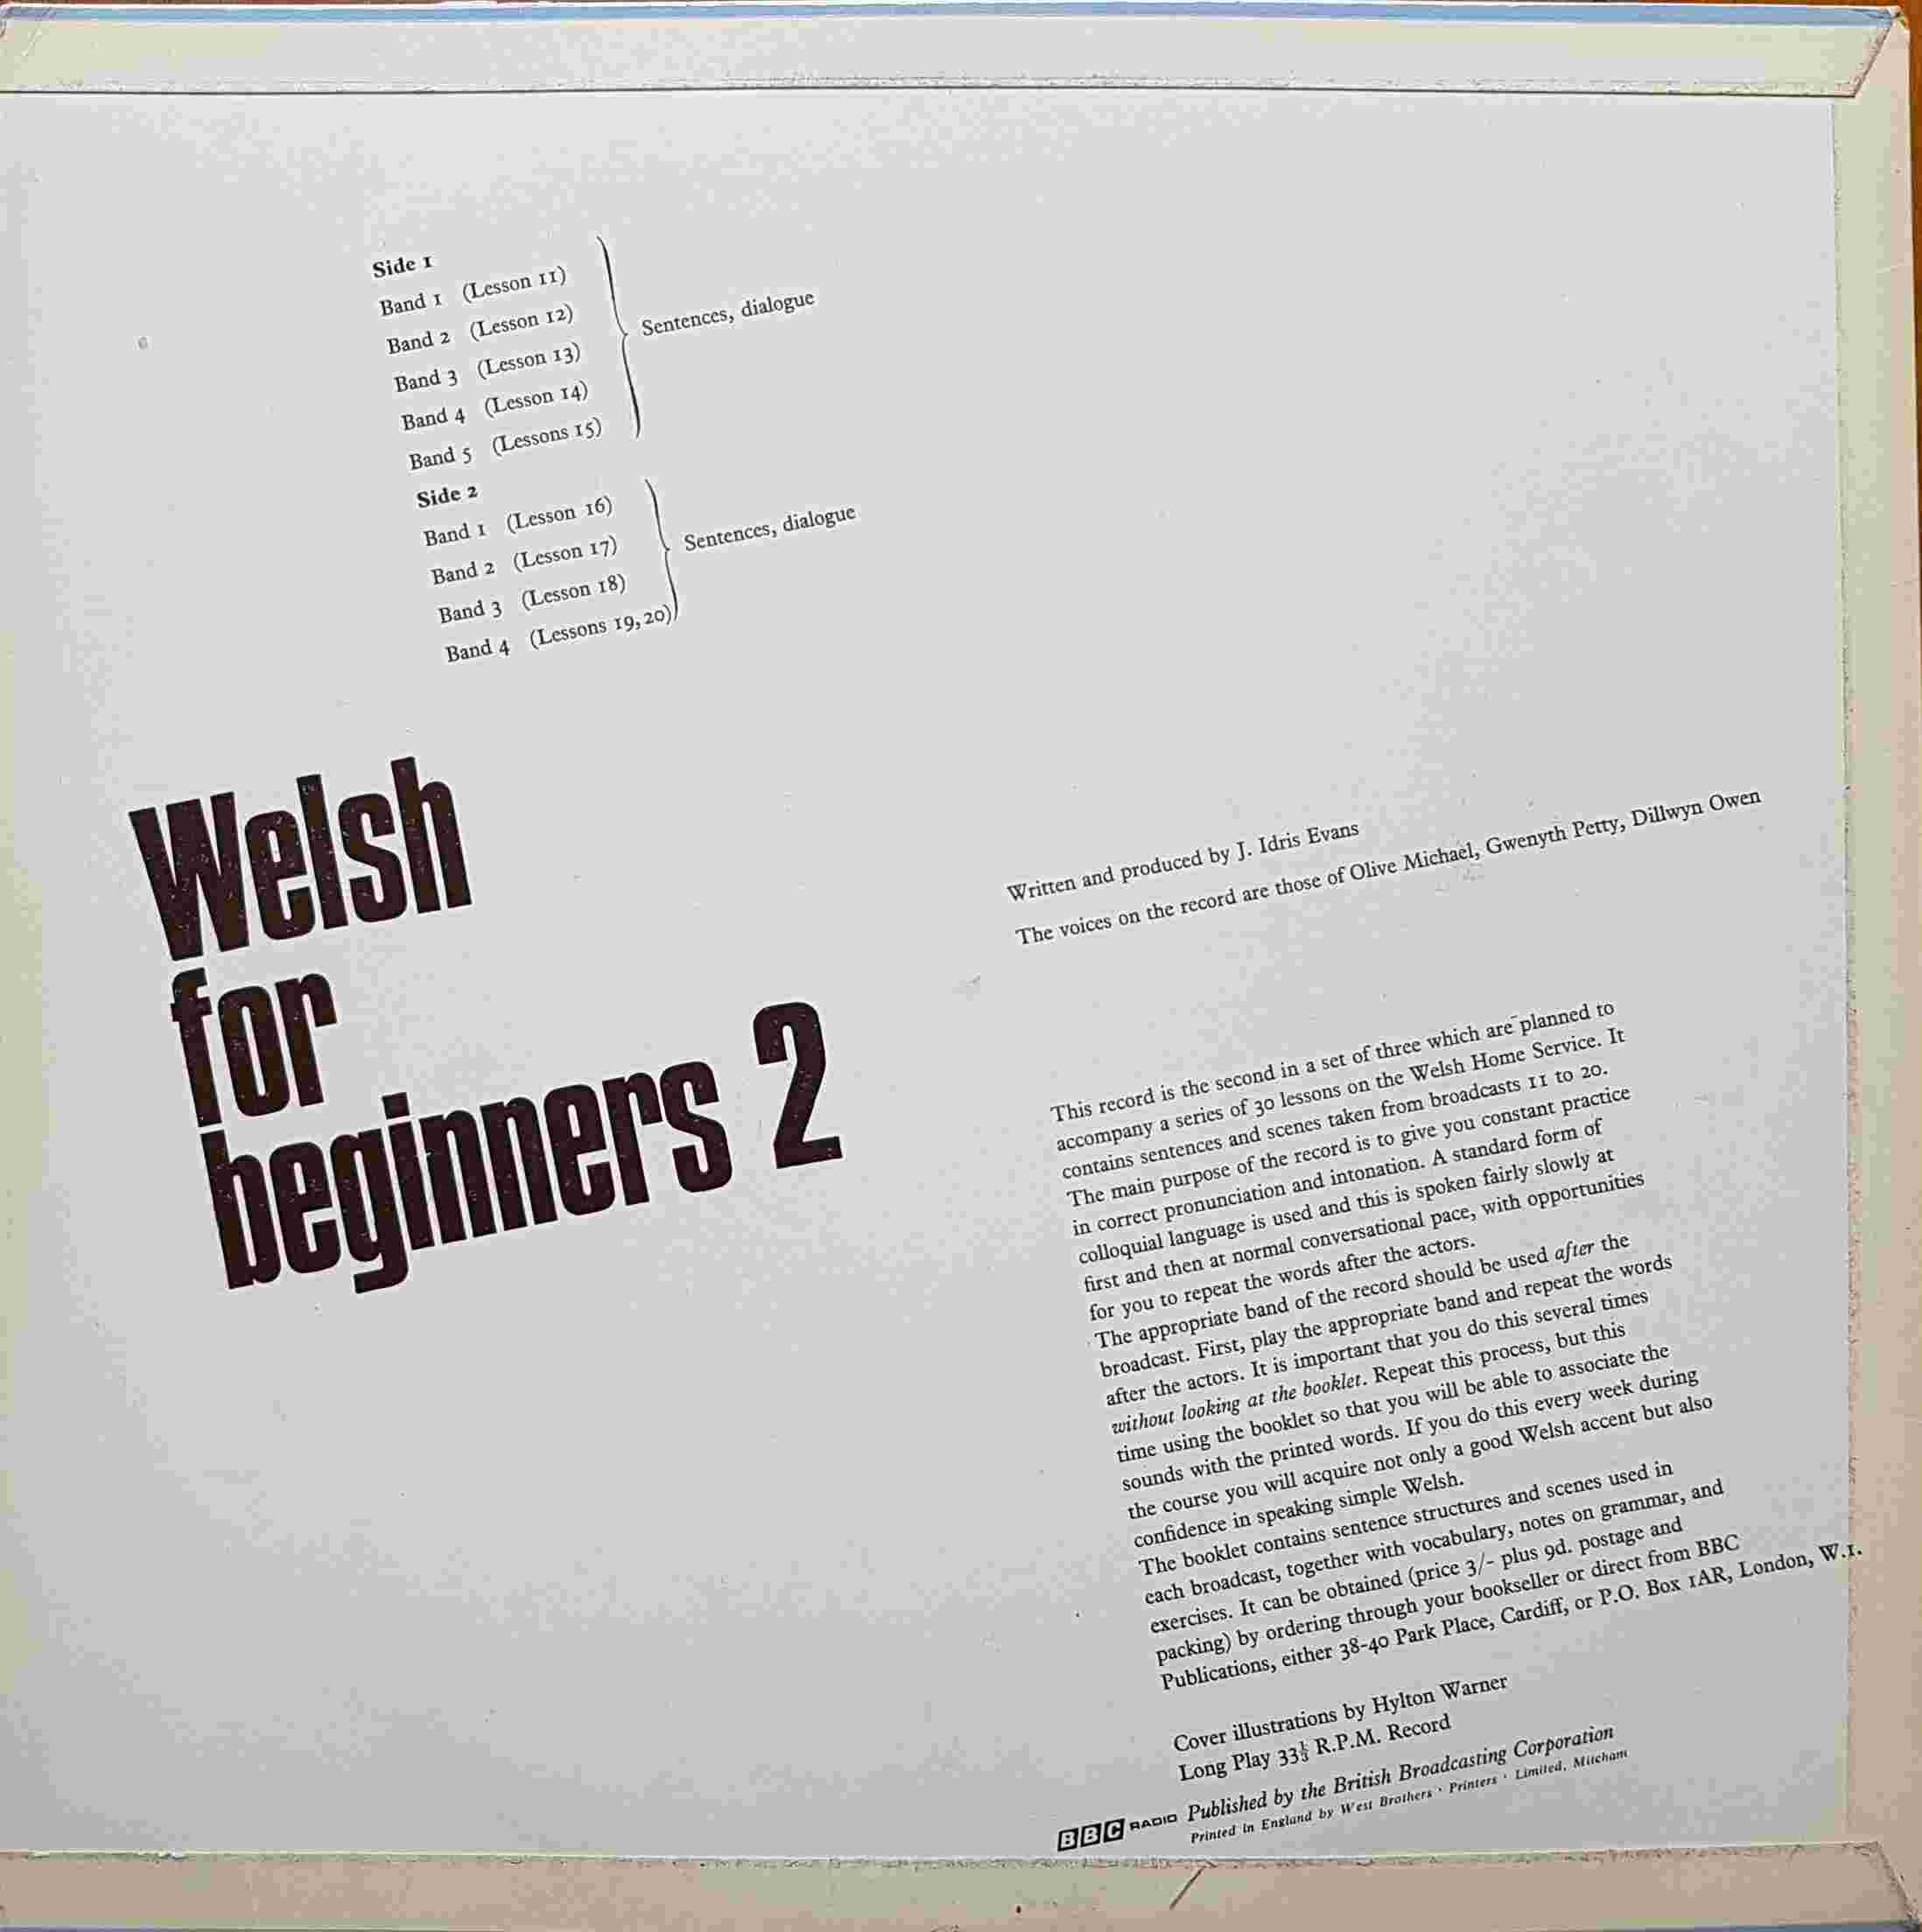 Picture of OP 103/104 Welsh for beginners - BBC radio course for beginners - Lessons 11 - 20 by artist J. Idres Evans from the BBC records and Tapes library